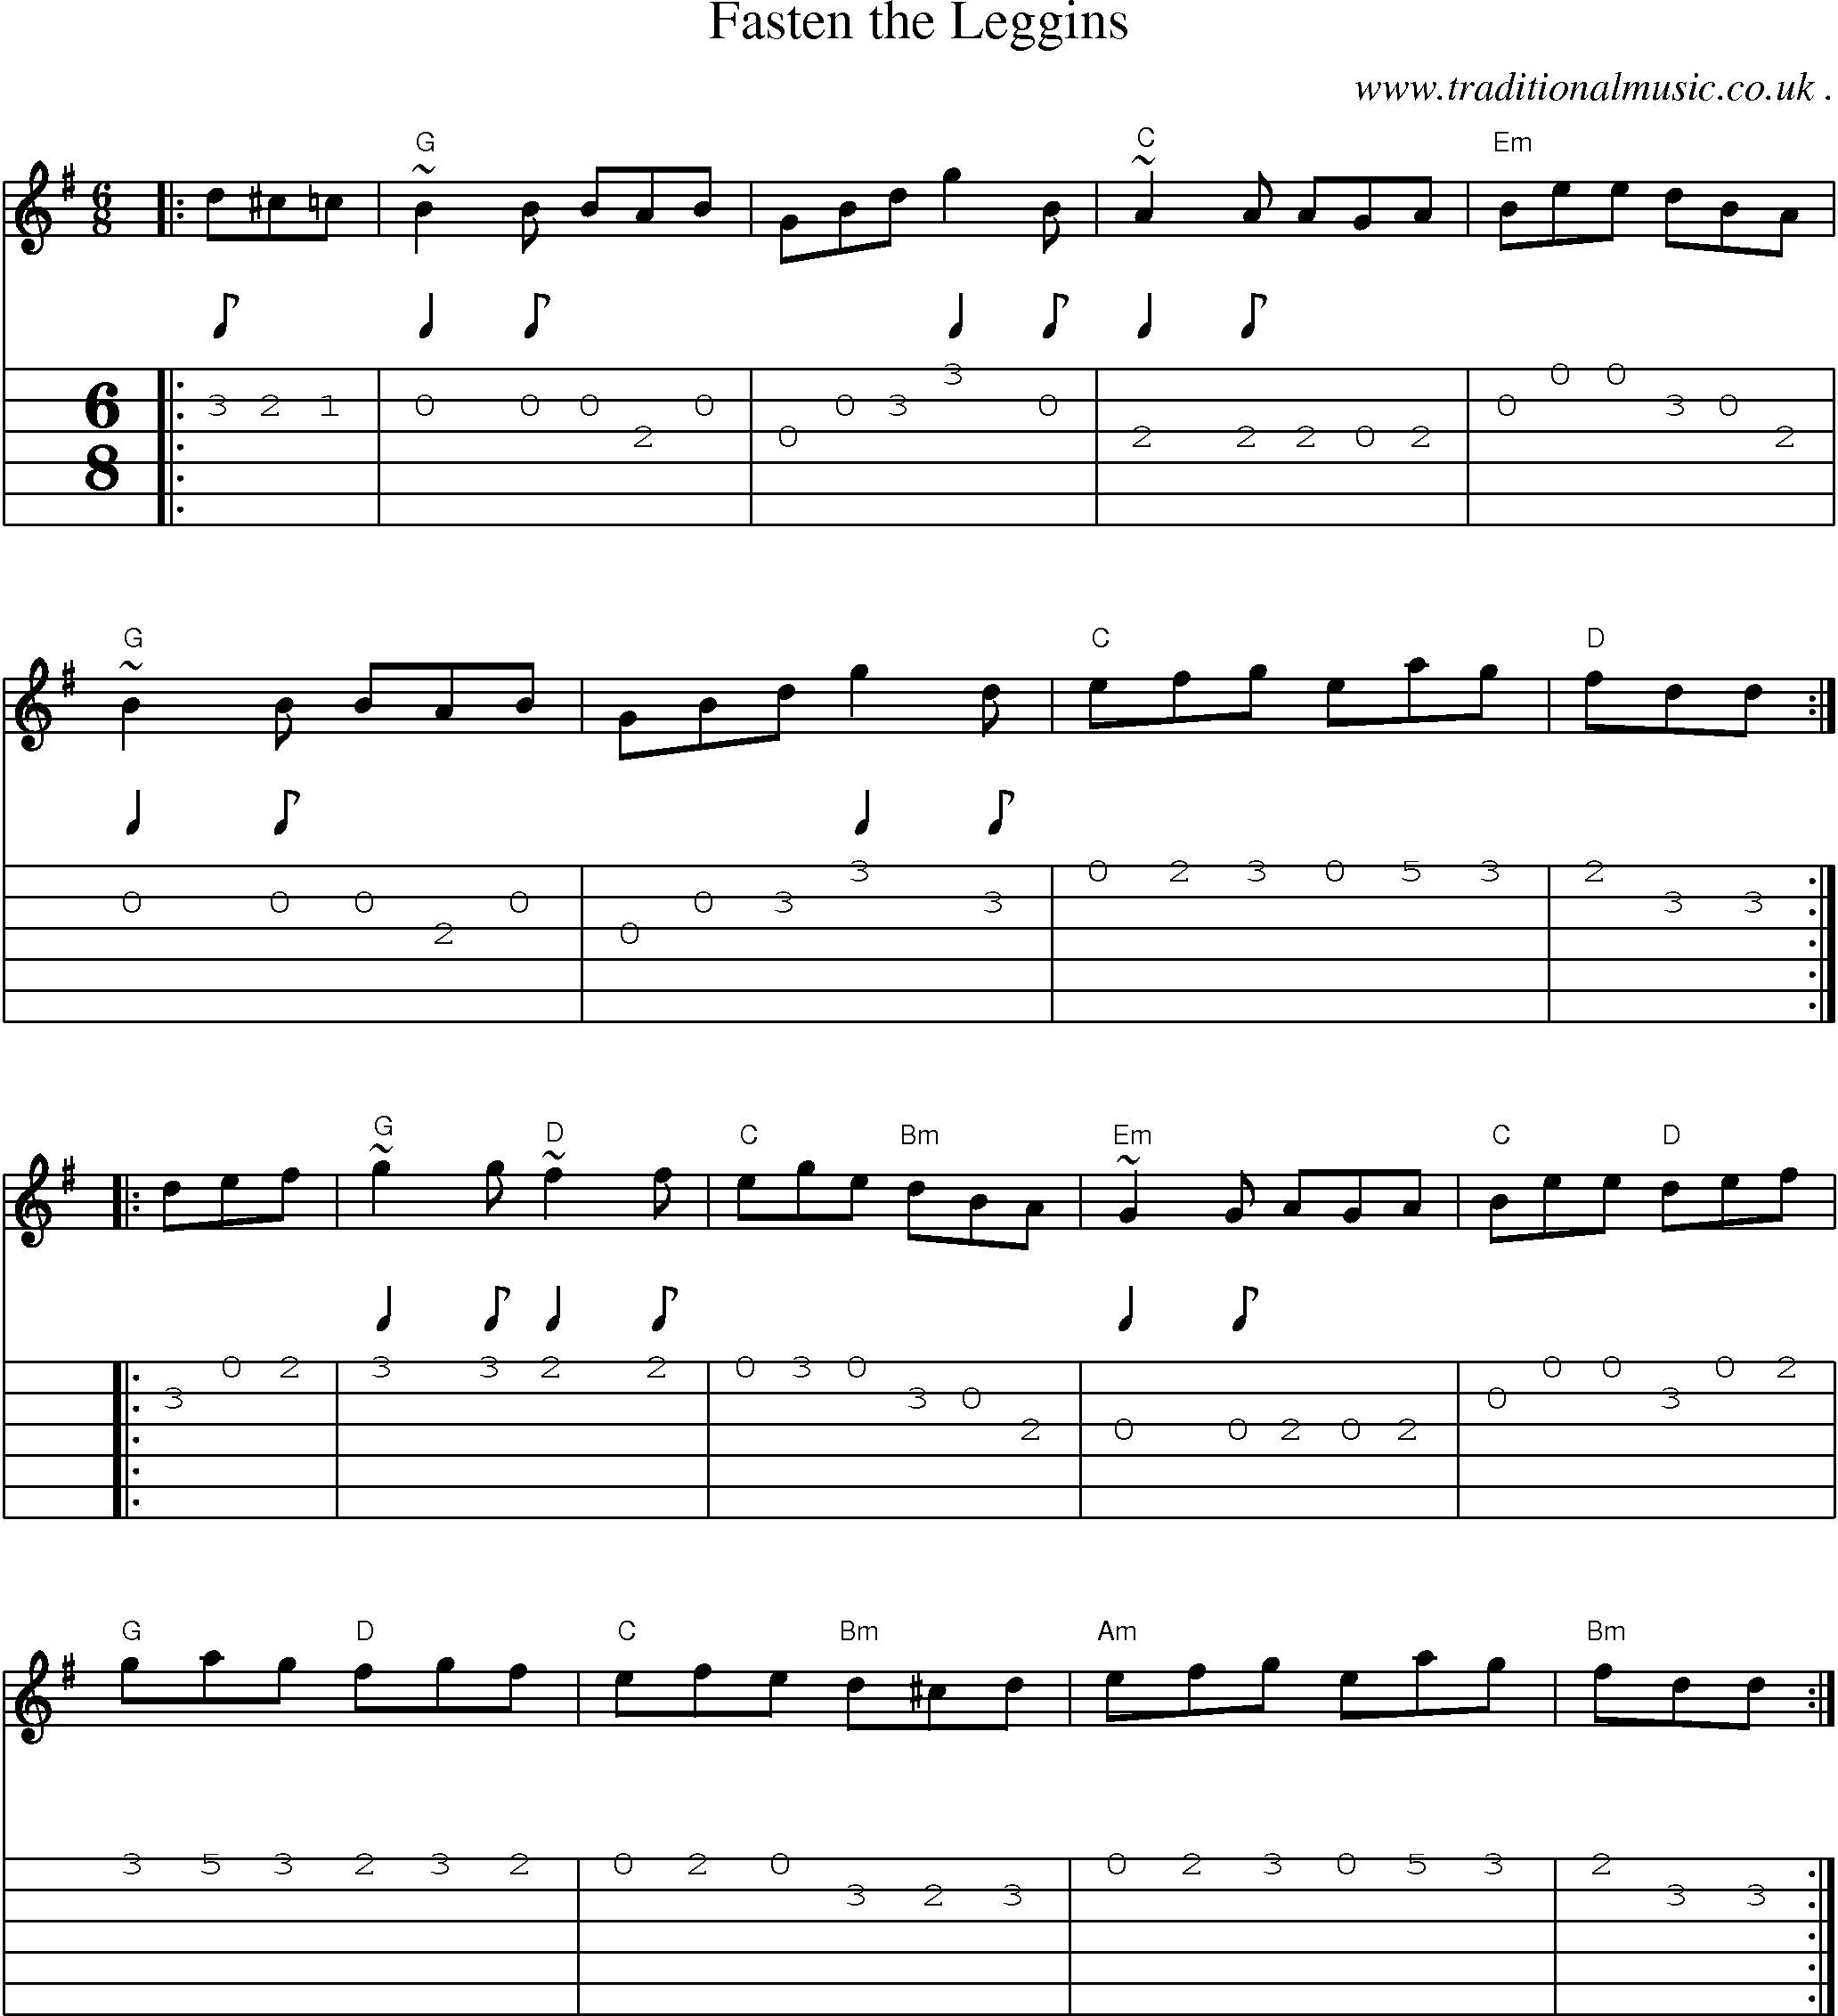 Music Score and Guitar Tabs for Fasten The Leggins